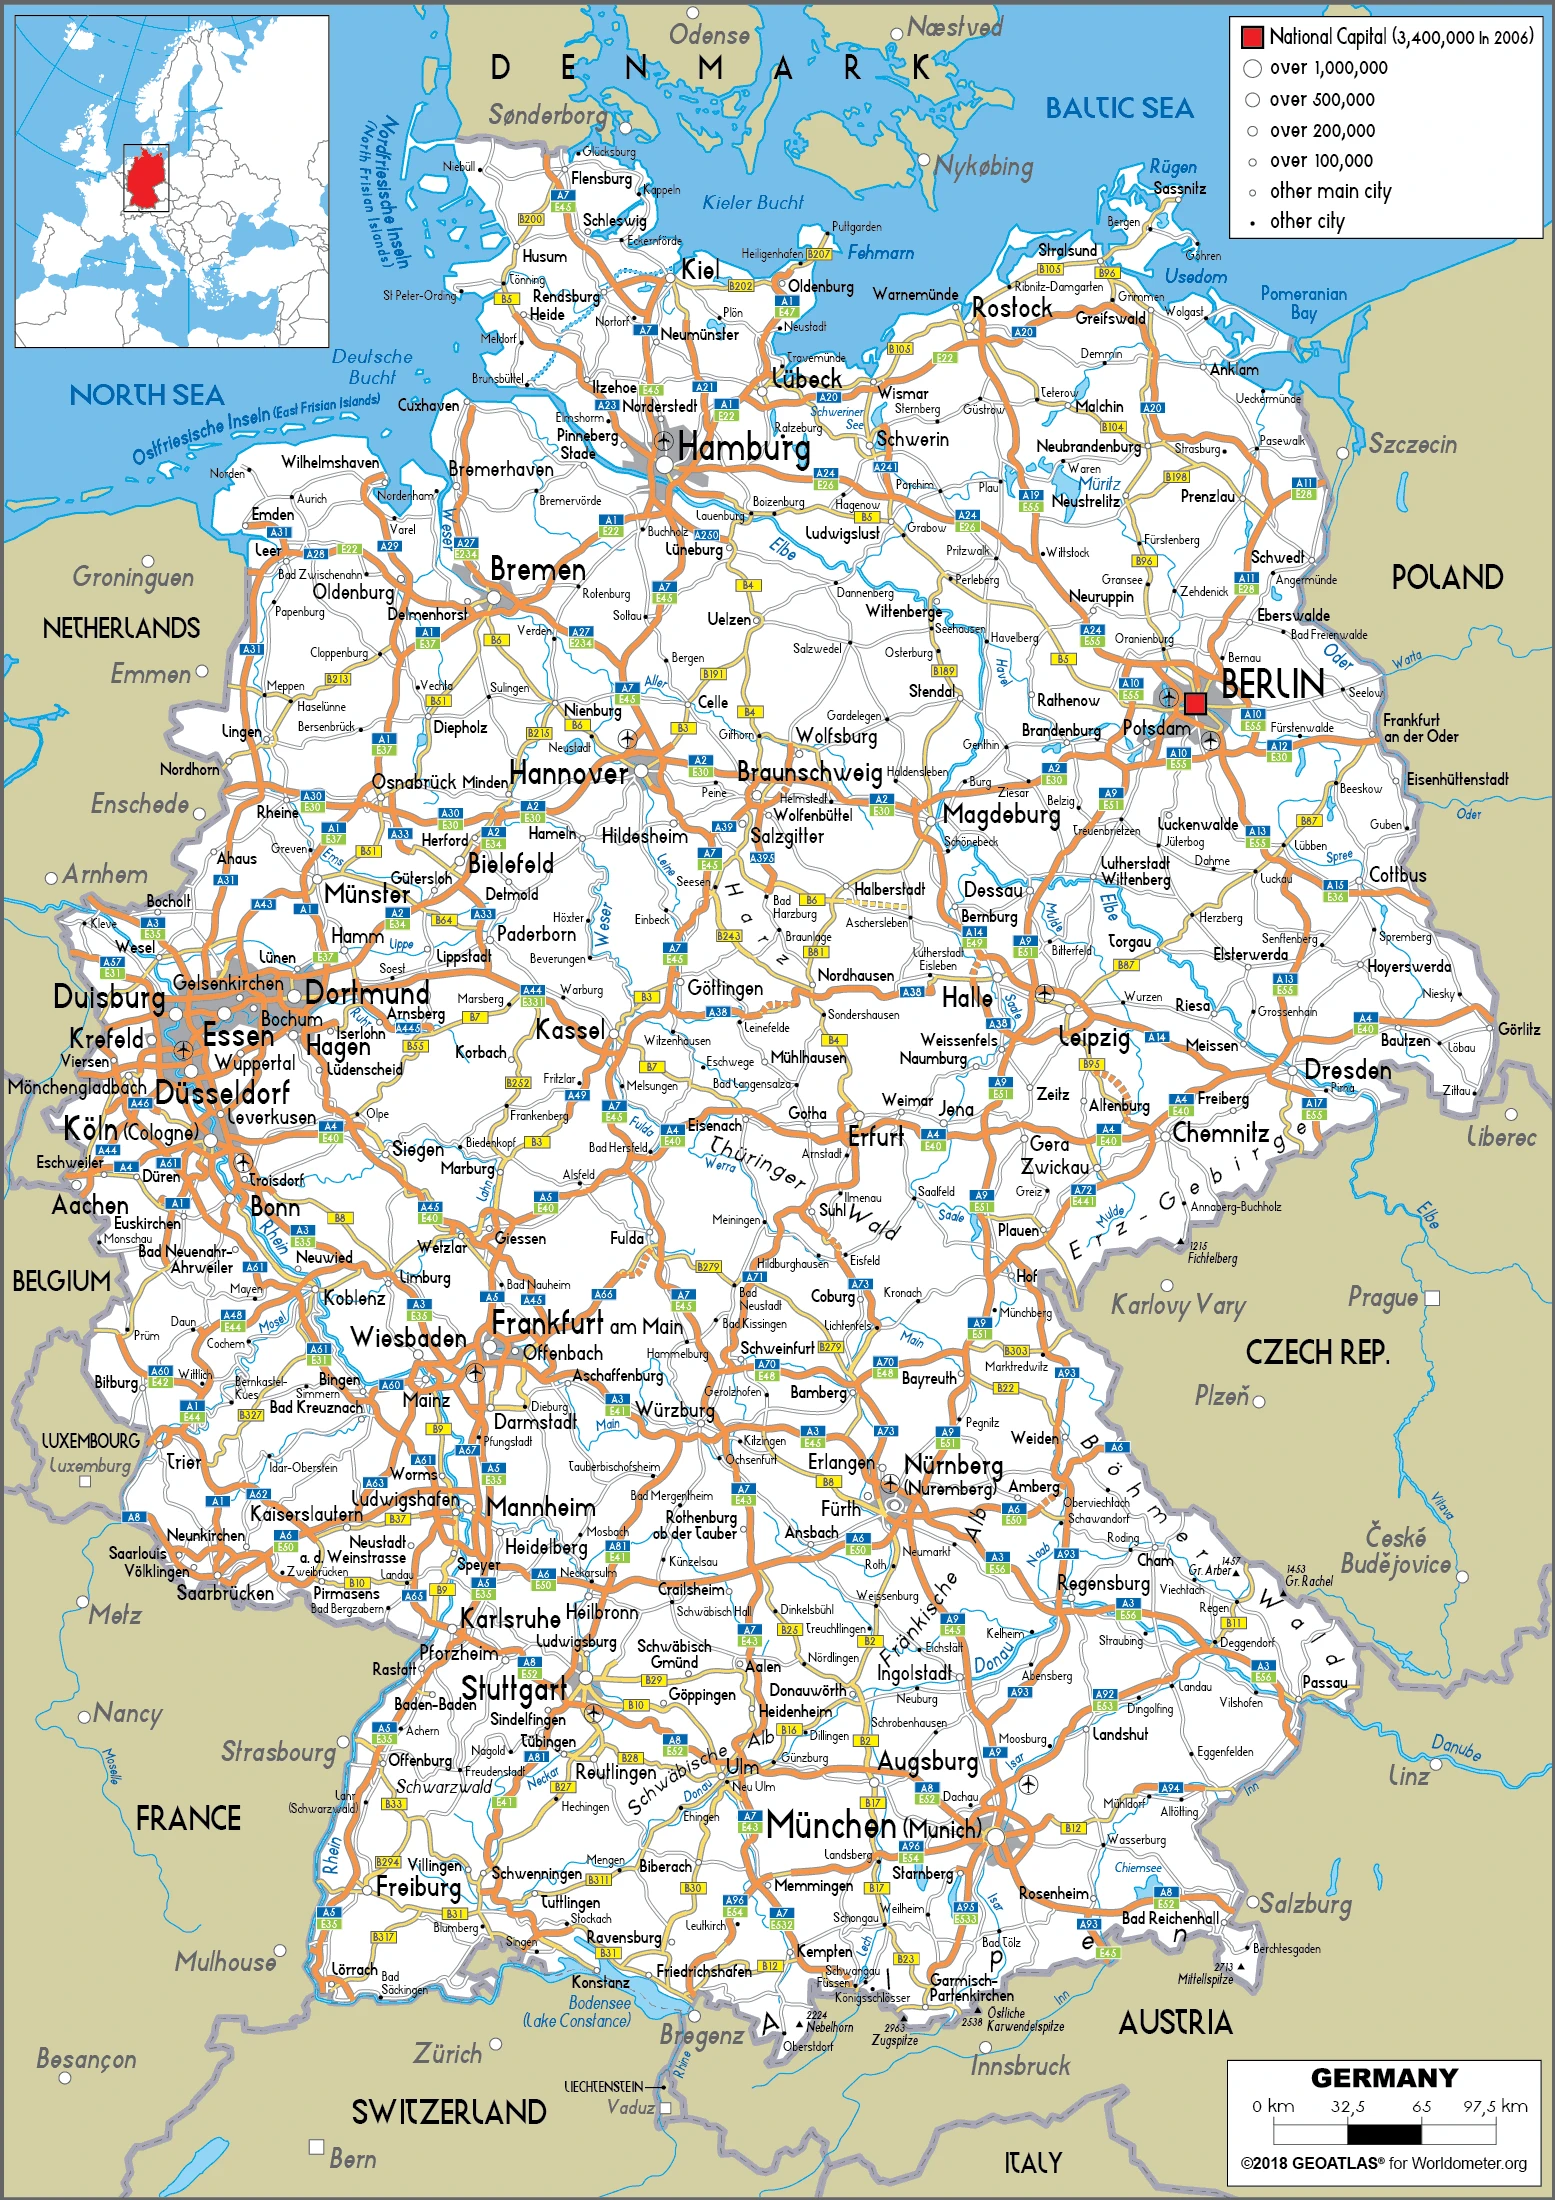 The route plan of the German roadways.